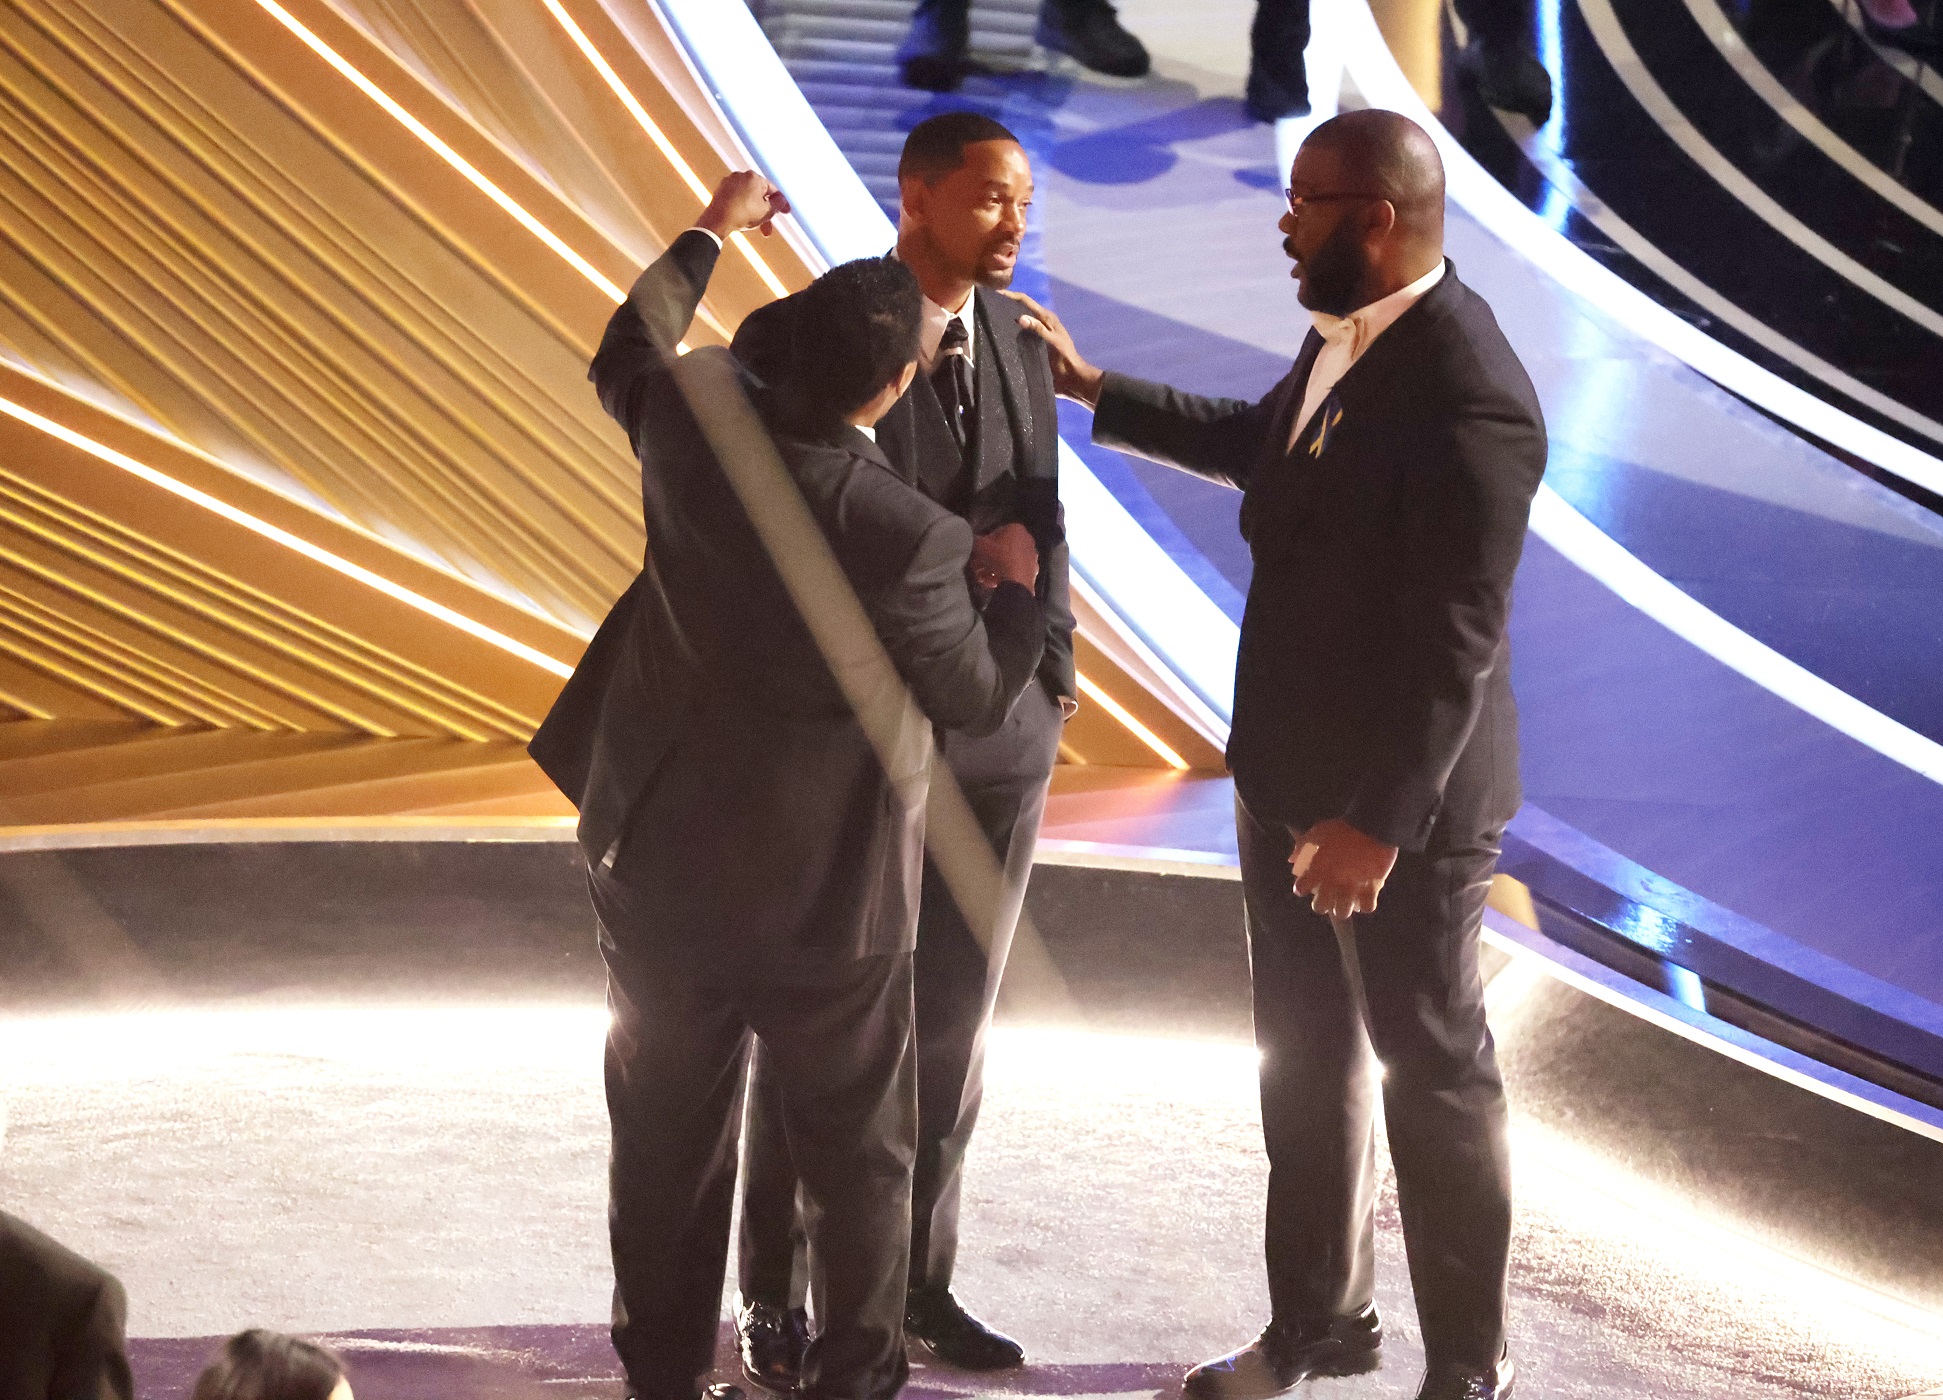 Denzel Washington and Tyler Perry talk to Will Smith after Smith charged the stage and slapped Chris Rock